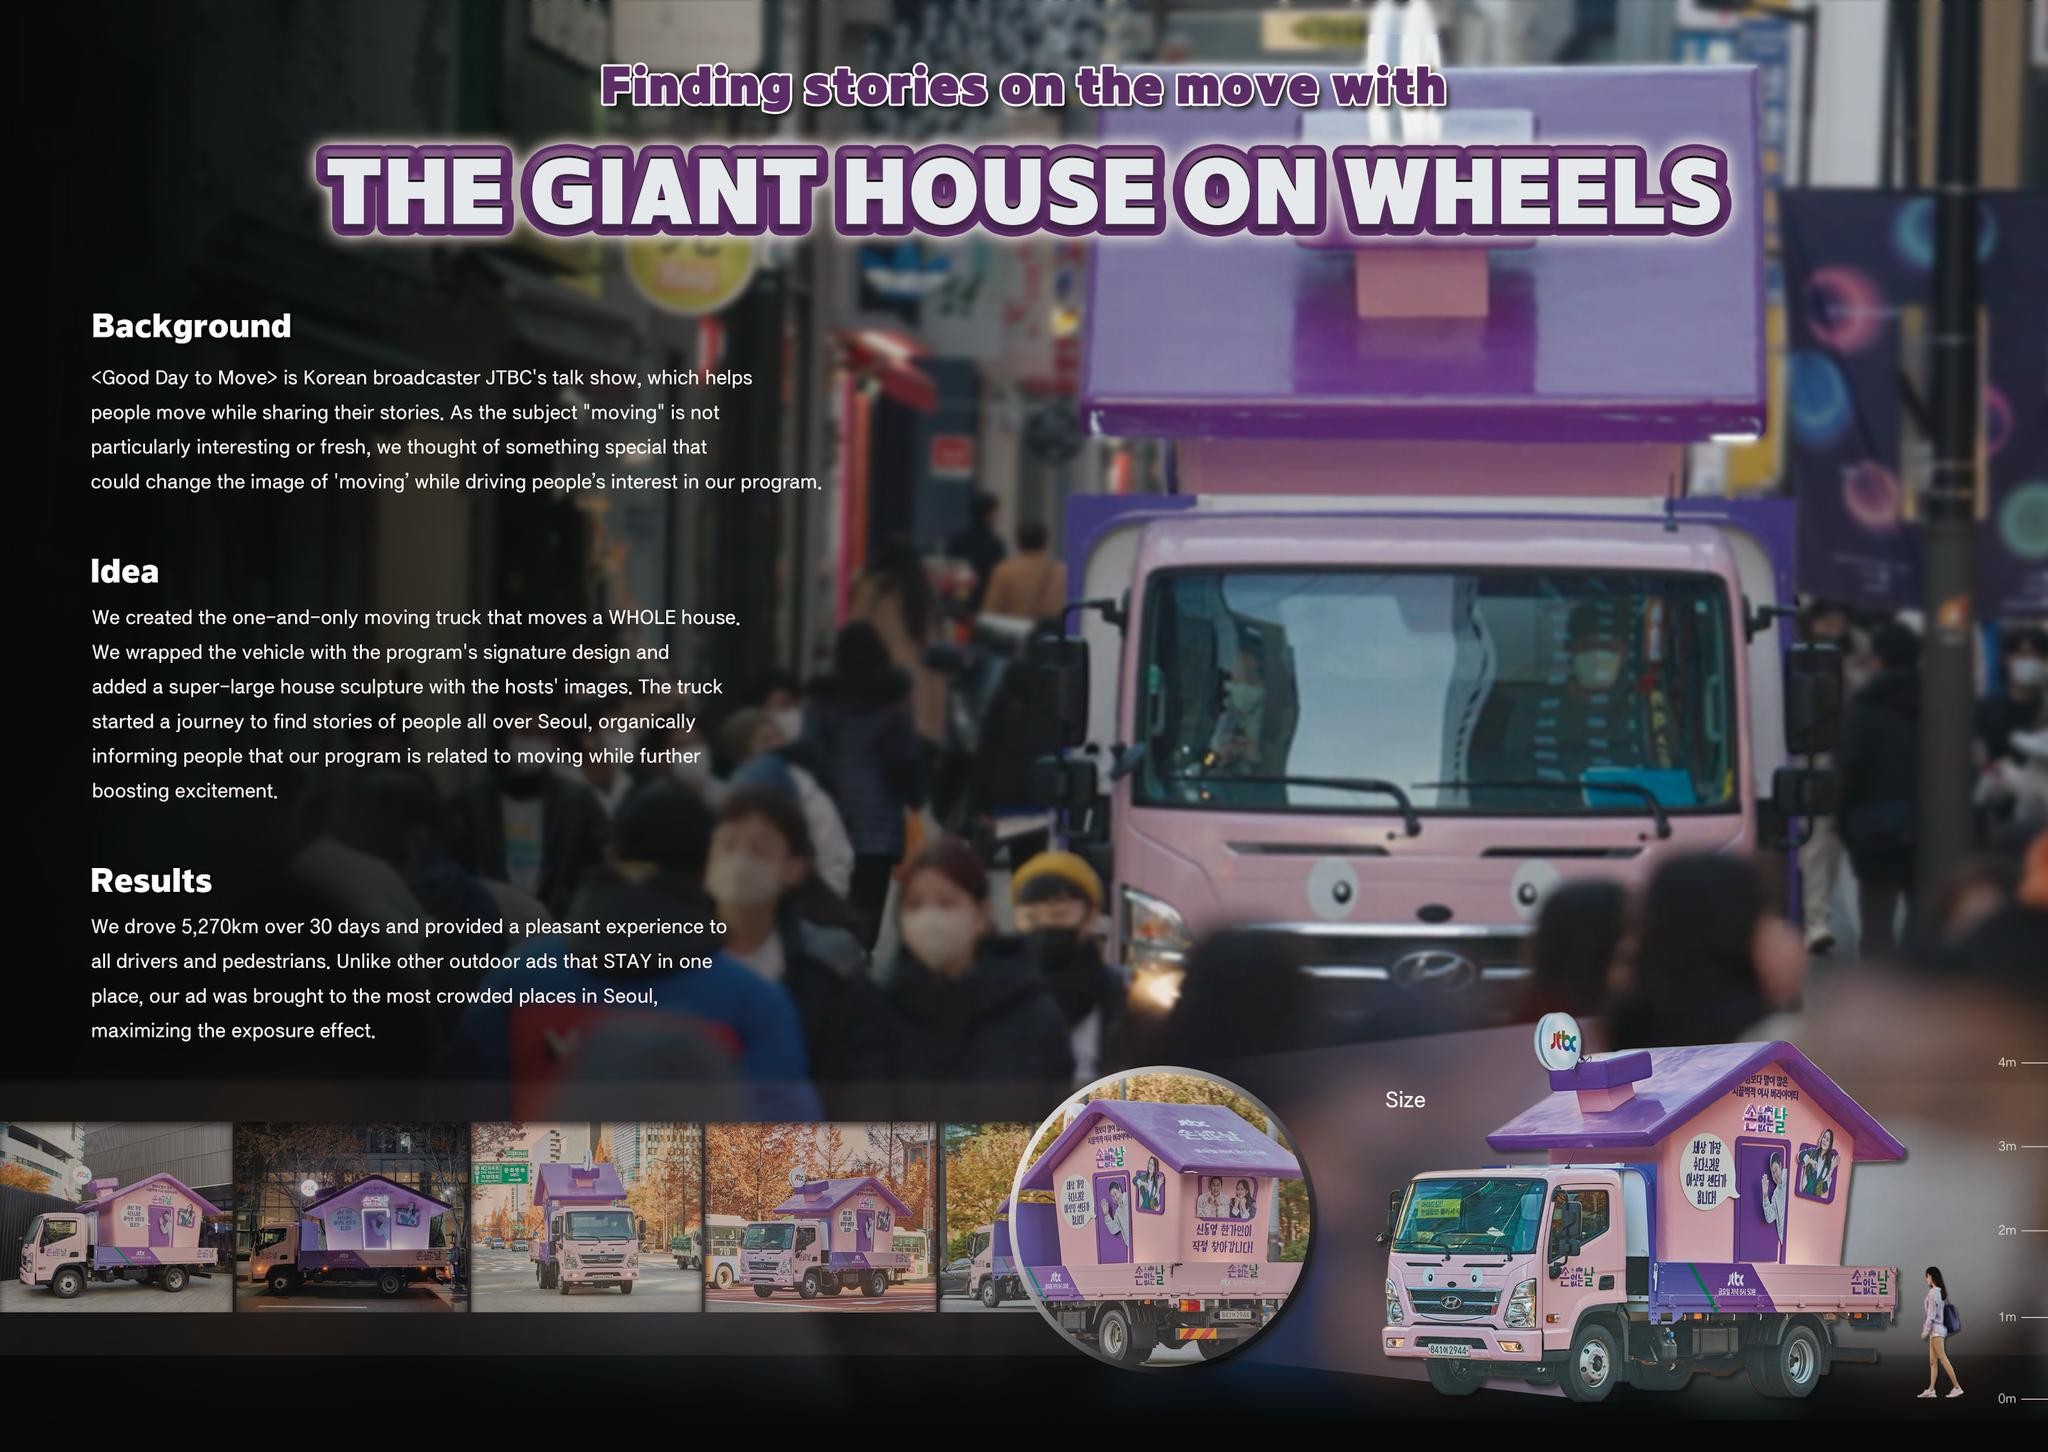 THE GIANT HOUSE ON WHEELS